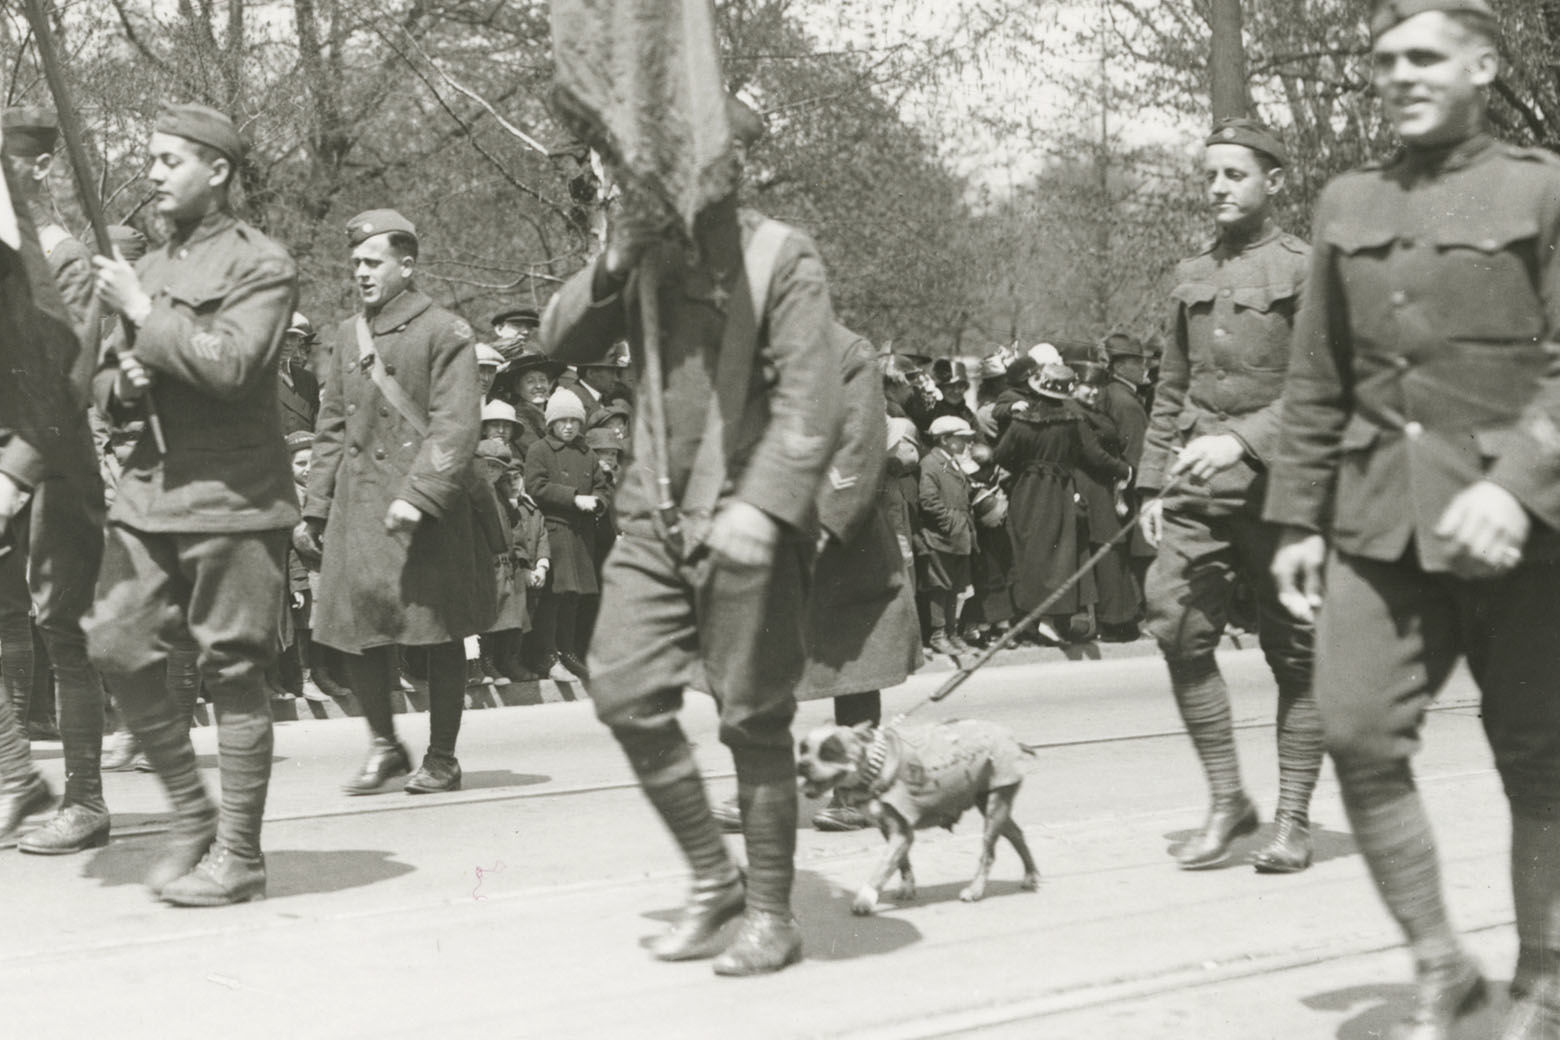 This April 30, 1919 photograph provided by the Connecticut State Library shows famed war dog Stubby walking in a homecoming parade for World War I veterans in Hartford, Conn. Stubby is the subject of a new animated movie being released on April 13, 2018. (Connecticut State Library via AP)